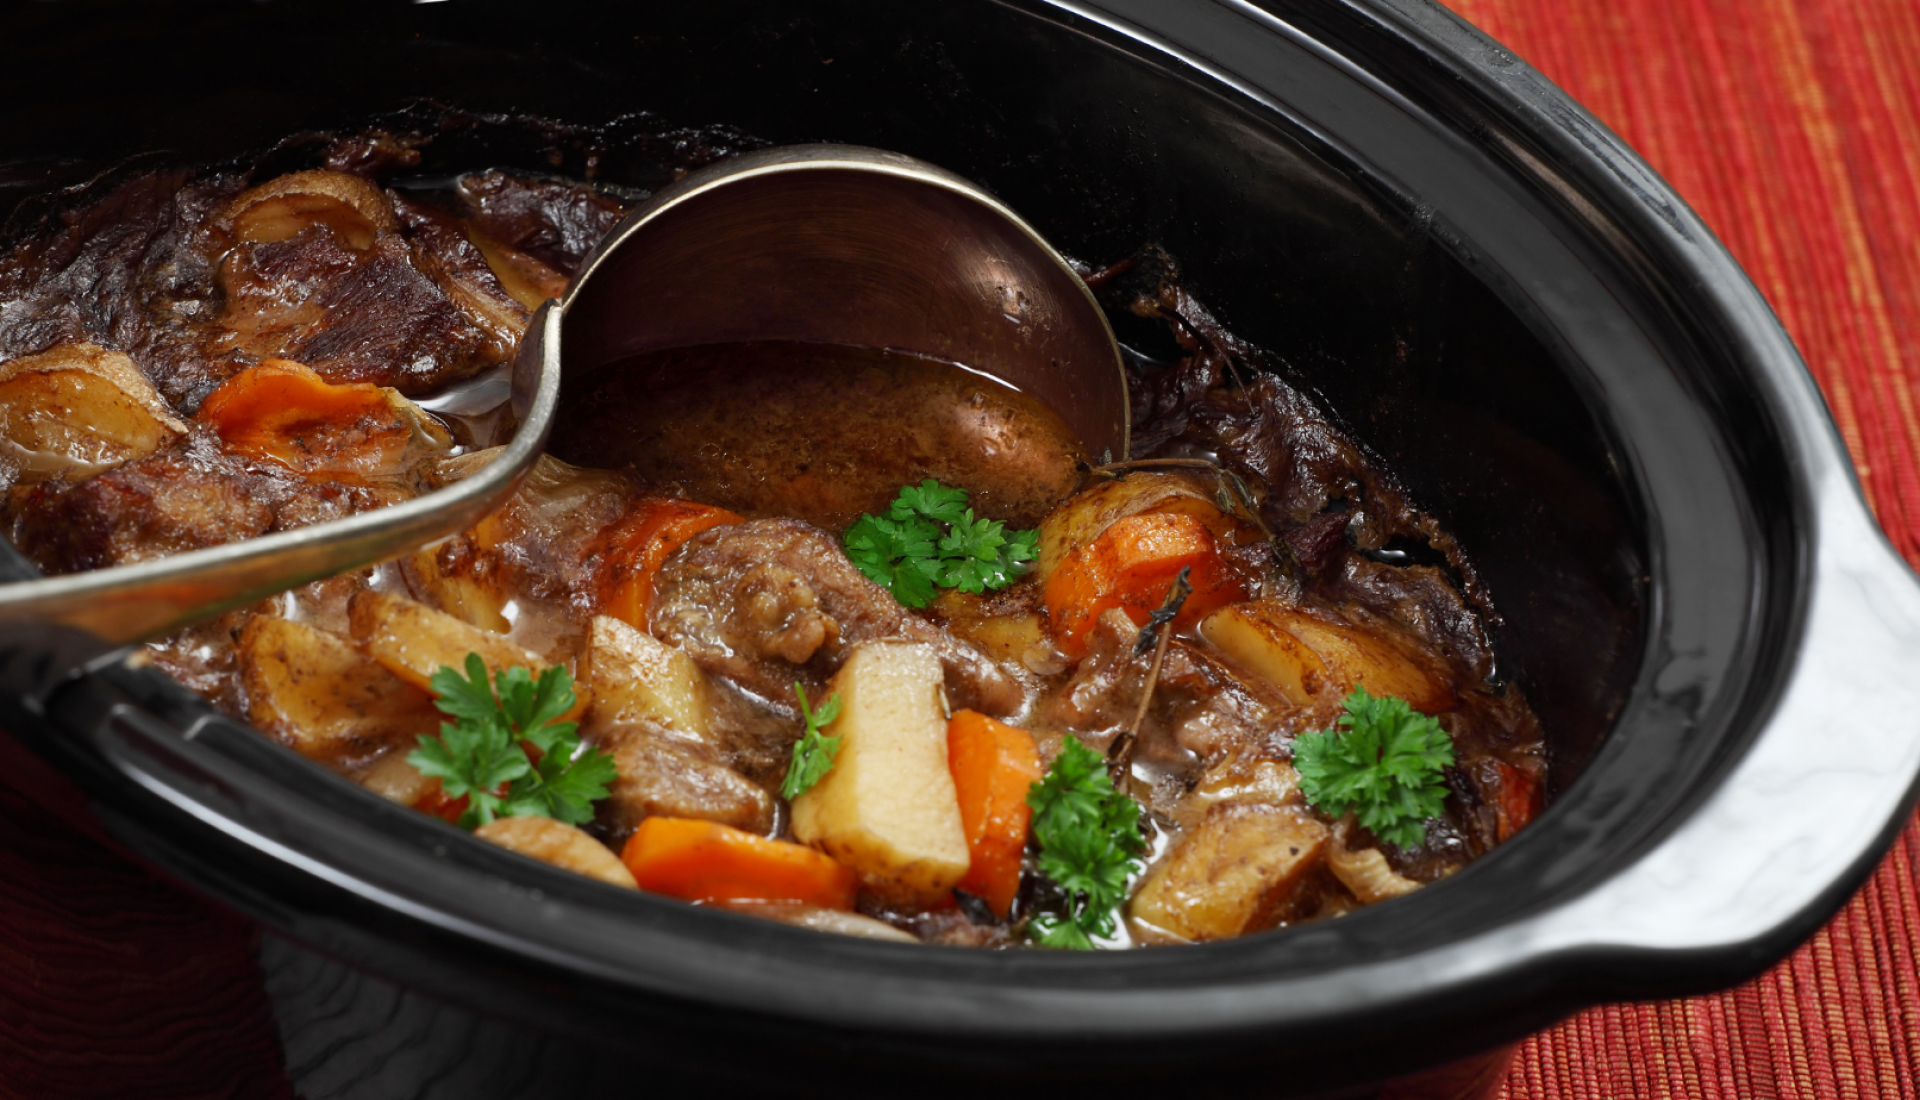 Rich Irish Guinness stew lamb and sausages